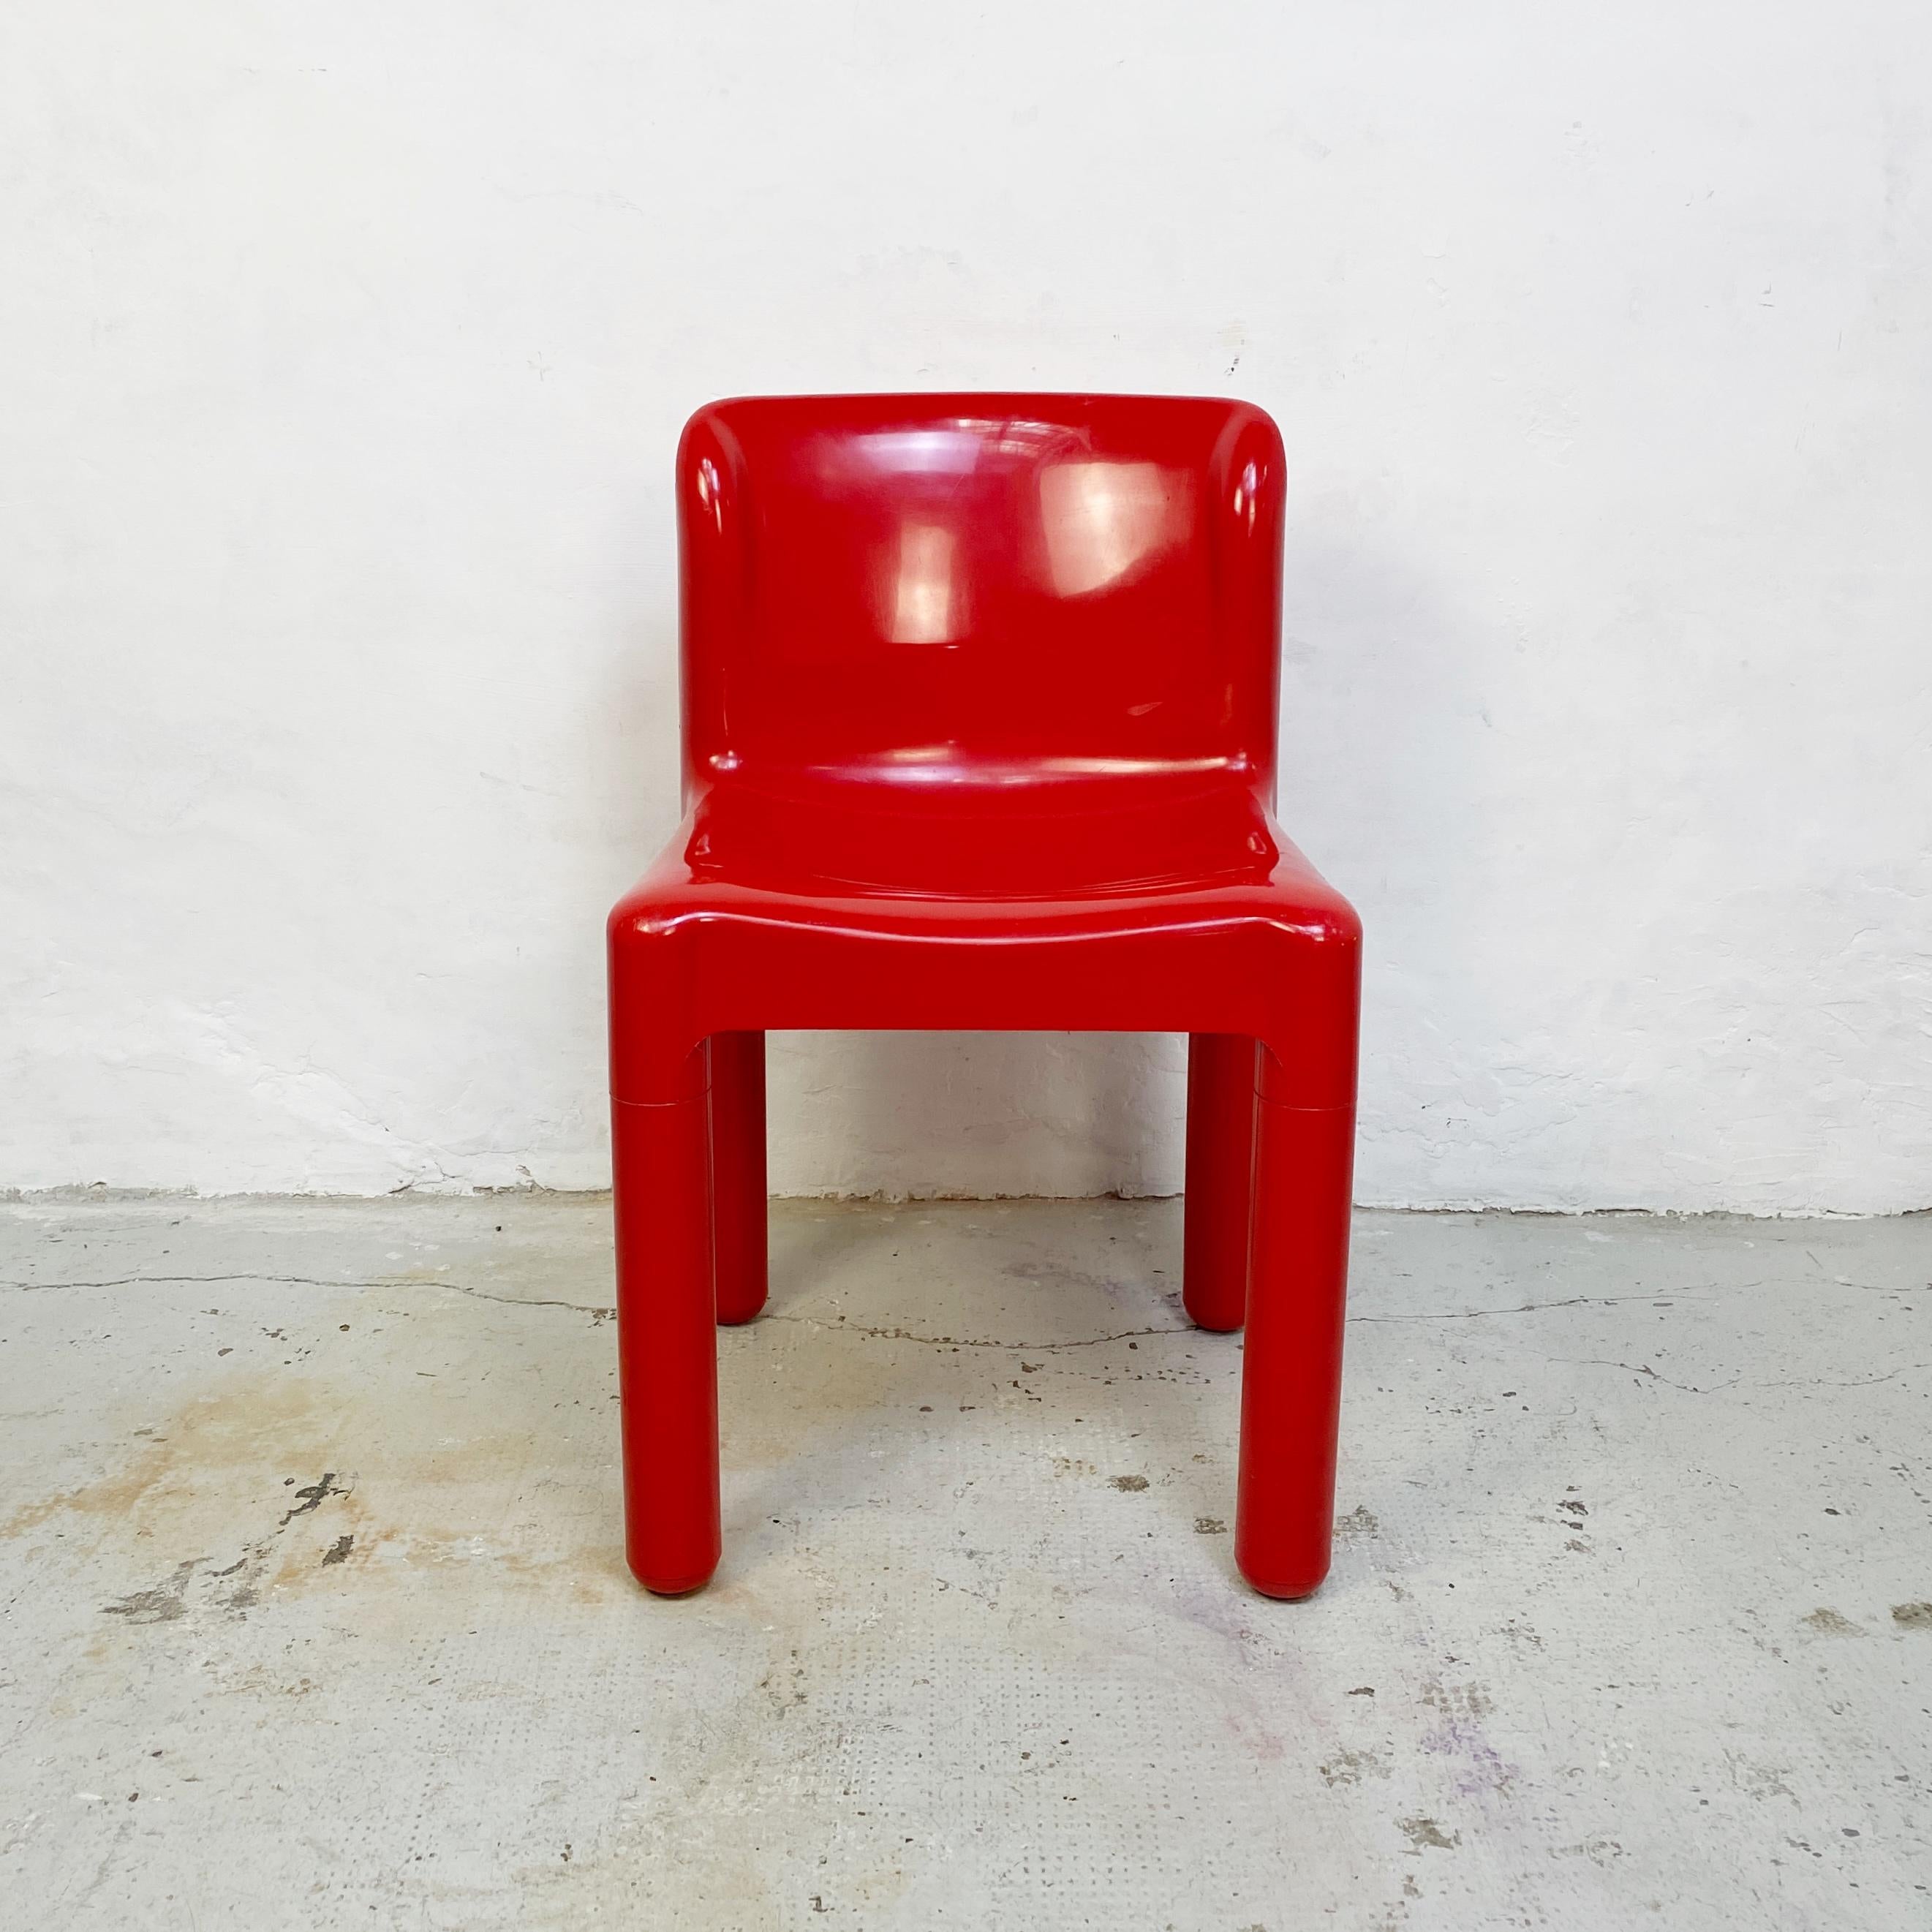 Italian modern red chairs mod. 4875 by Carlo Bartoli for Kartell, 1970s.
Pair of chairs with rounded shapes, In red plastic with removable legs.

Good conditions.

Measures in cm 42 x 46 x 72 H.